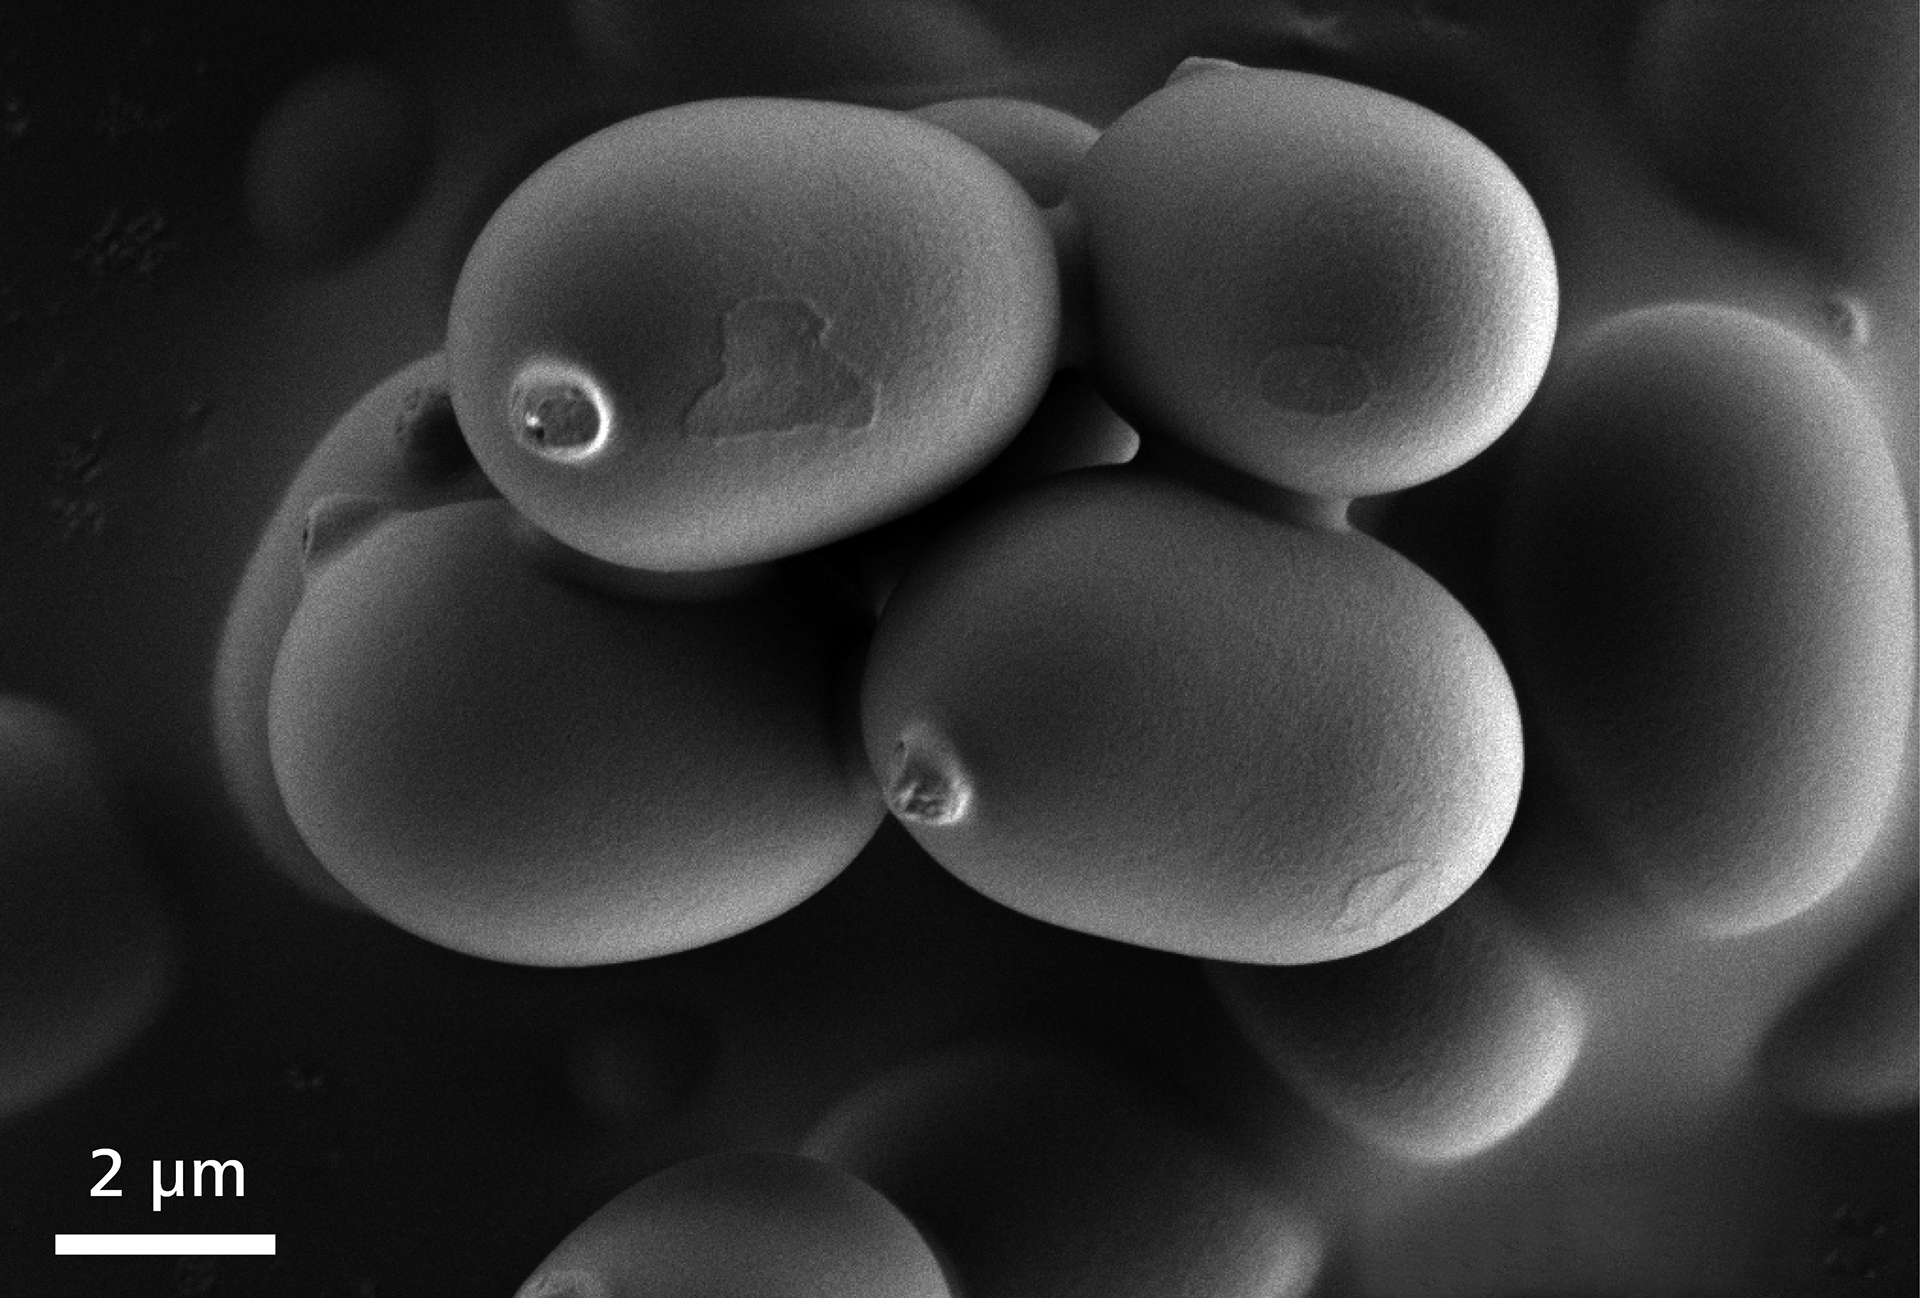 Mushroom spores imaged at 1 kV at high vacuum. These delicate, fragile structures can be imaged easily with Sigma 500 at low voltage